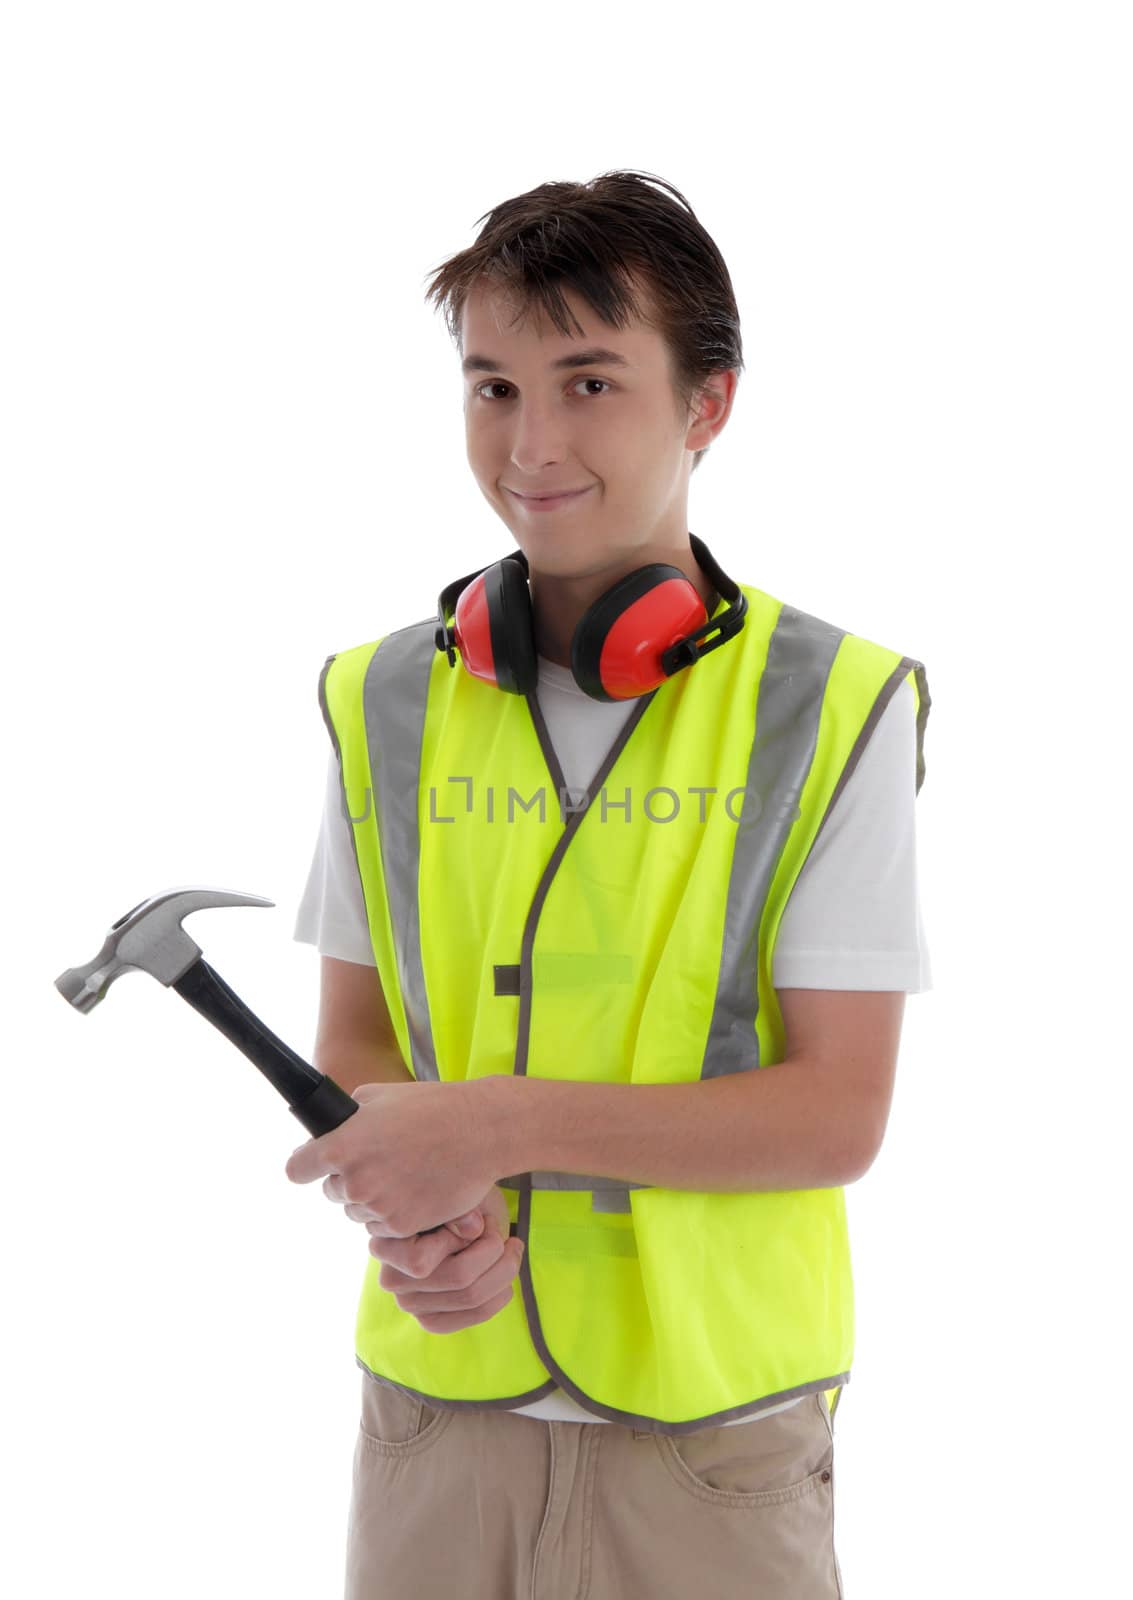 Teenager holding a hammer and smiling.  White background.